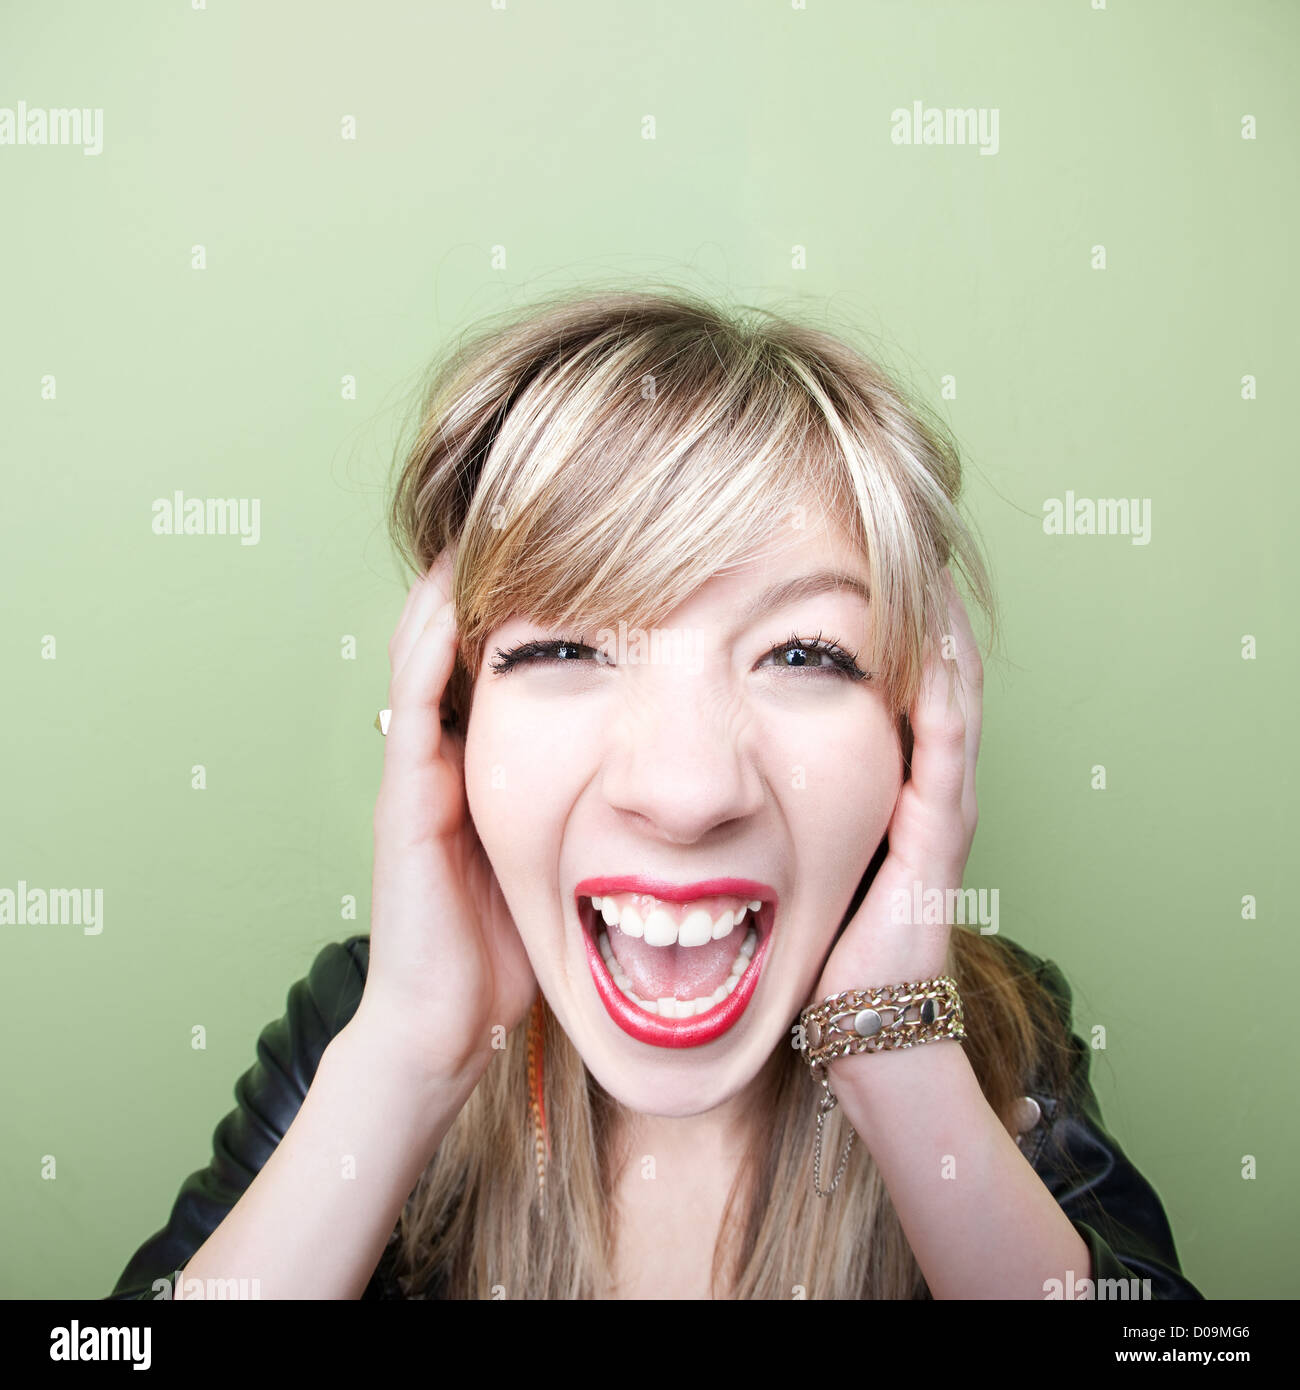 Young Caucasian woman screams with ears covered Stock Photo